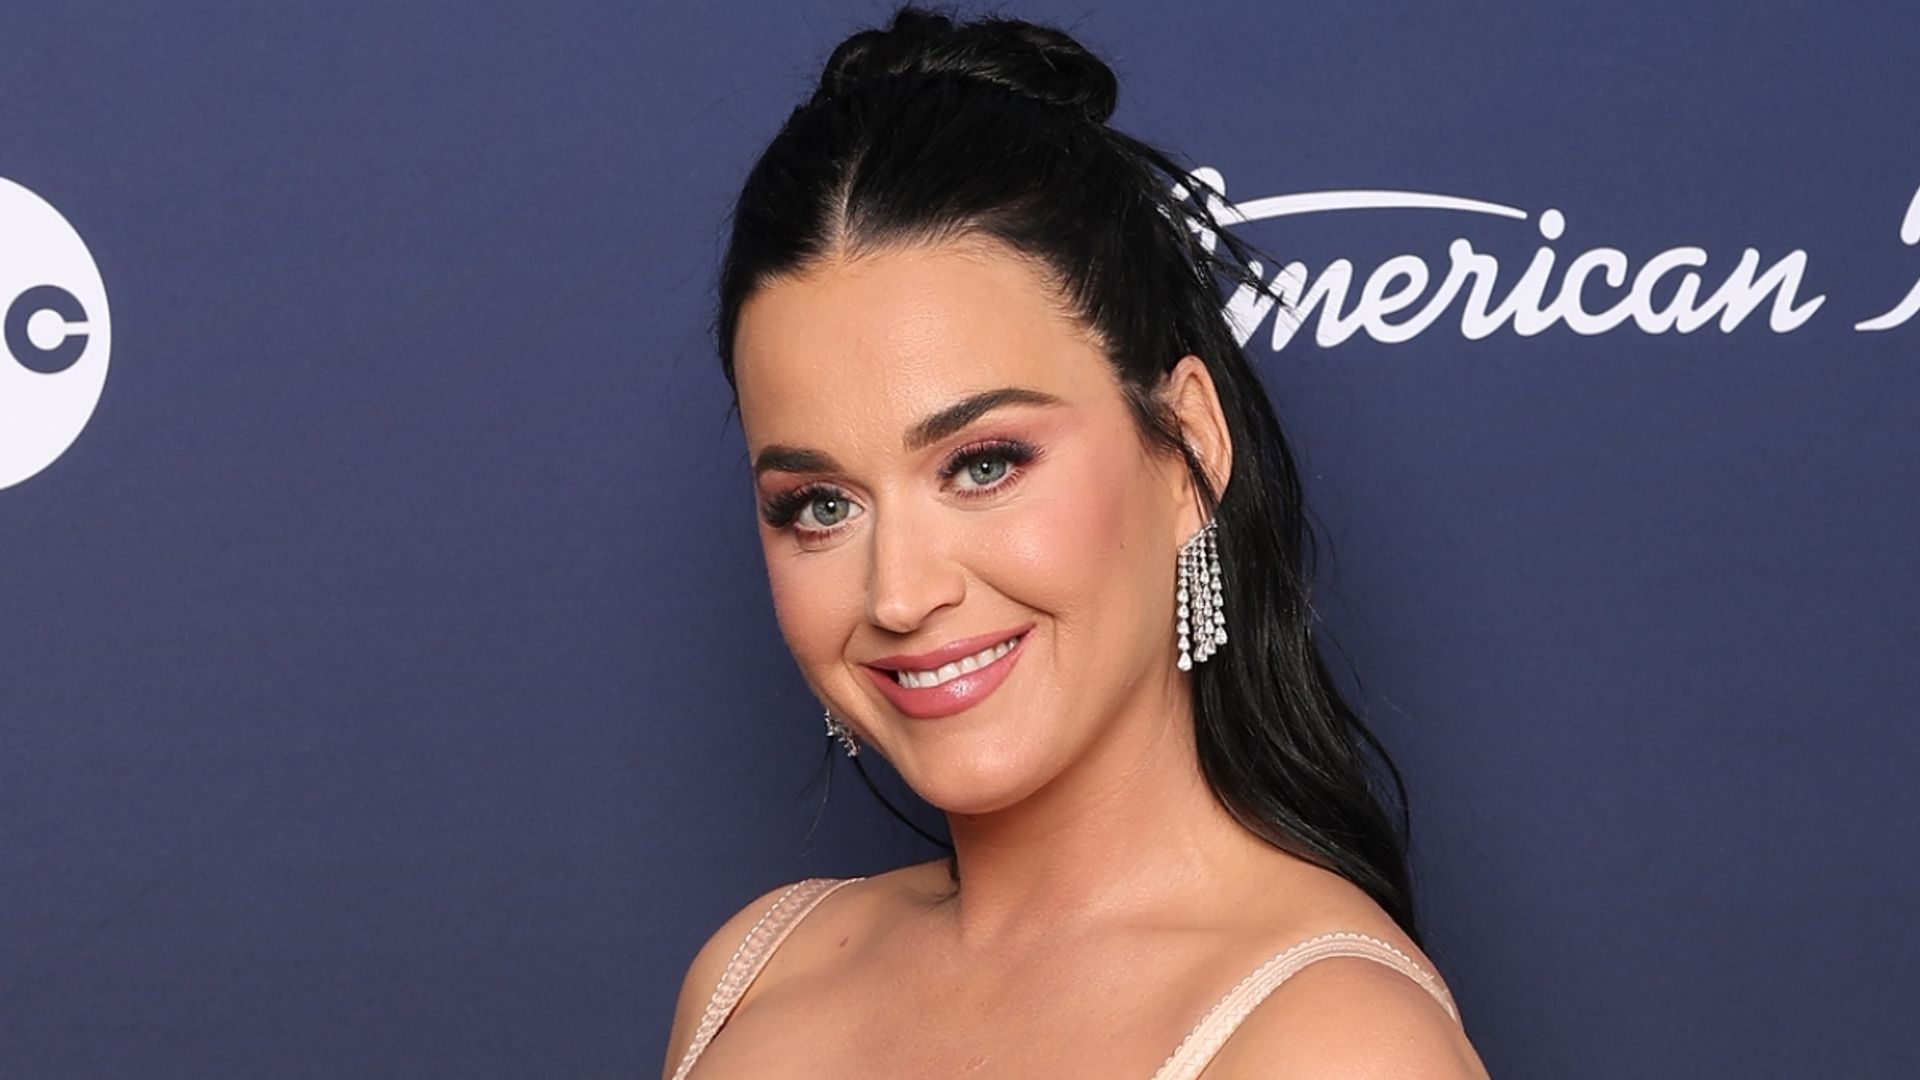 Katy Perry channels Teenage Dream era with major hair transformation